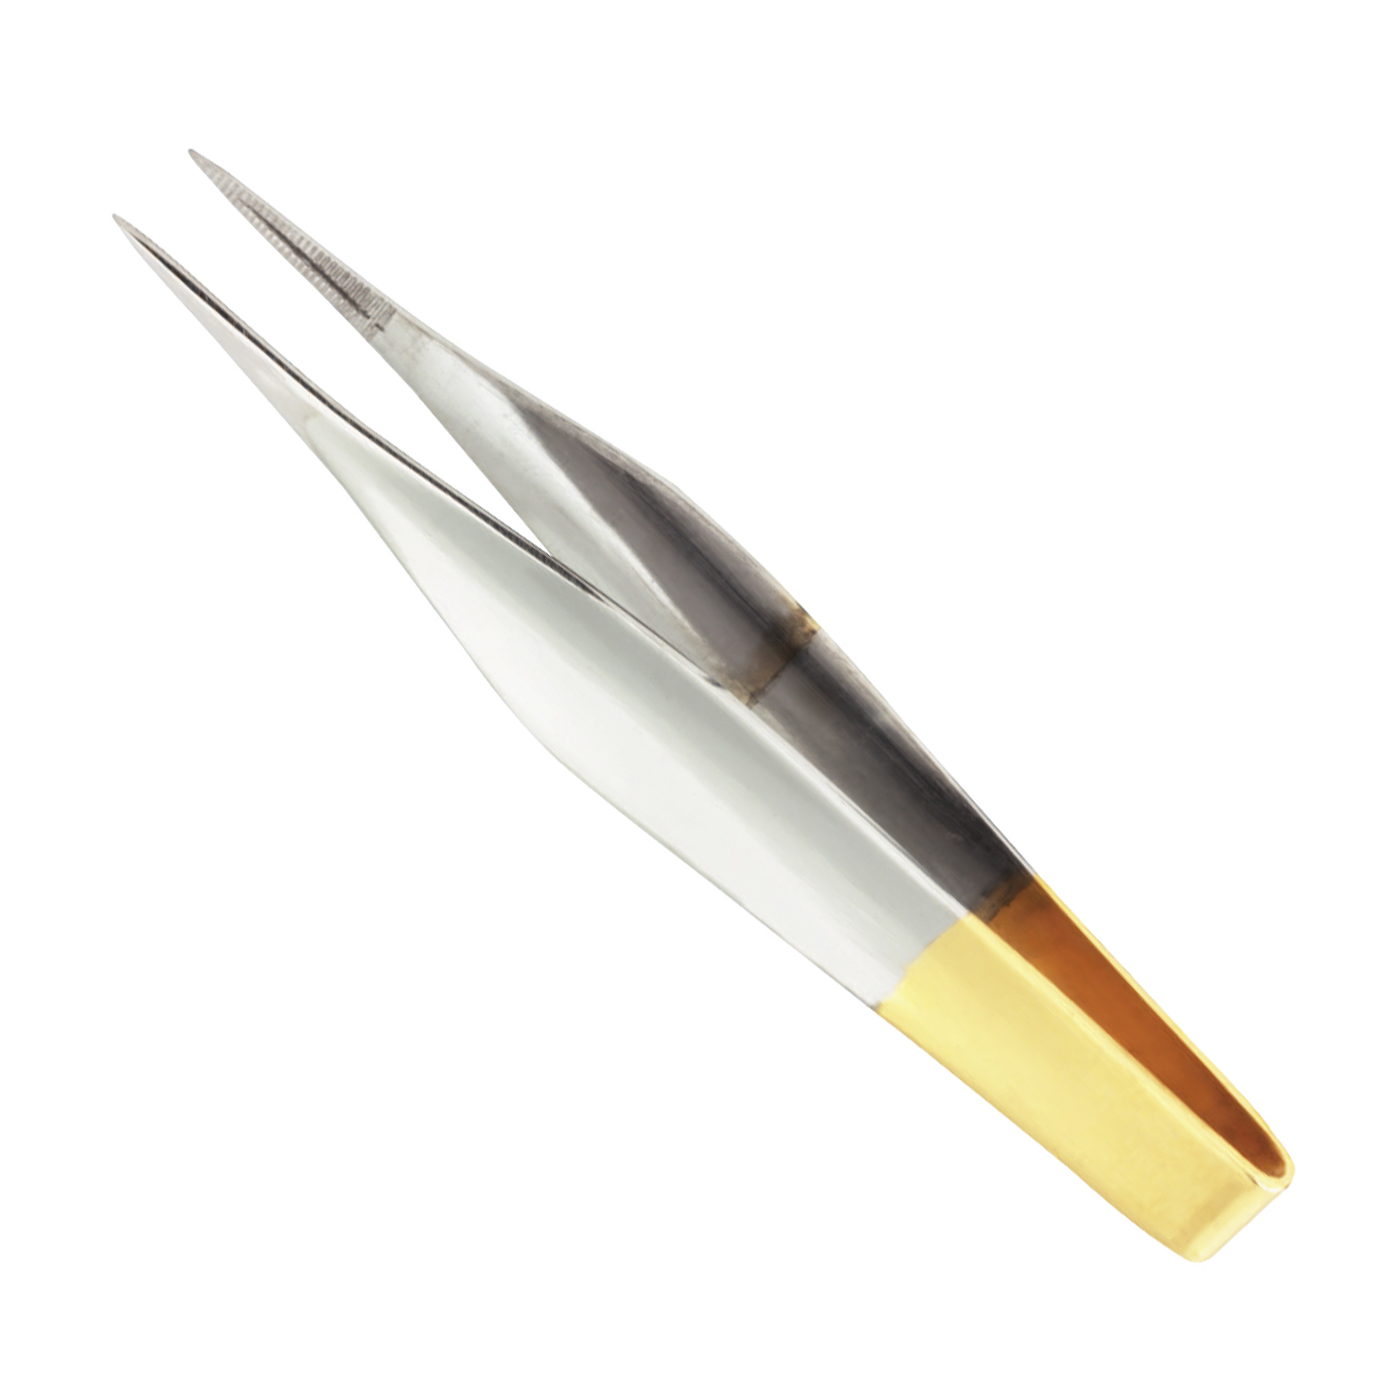 FINO Foil Tweezers, Grooved, Gold-Coloured Handle, 115 mm - 1 piece